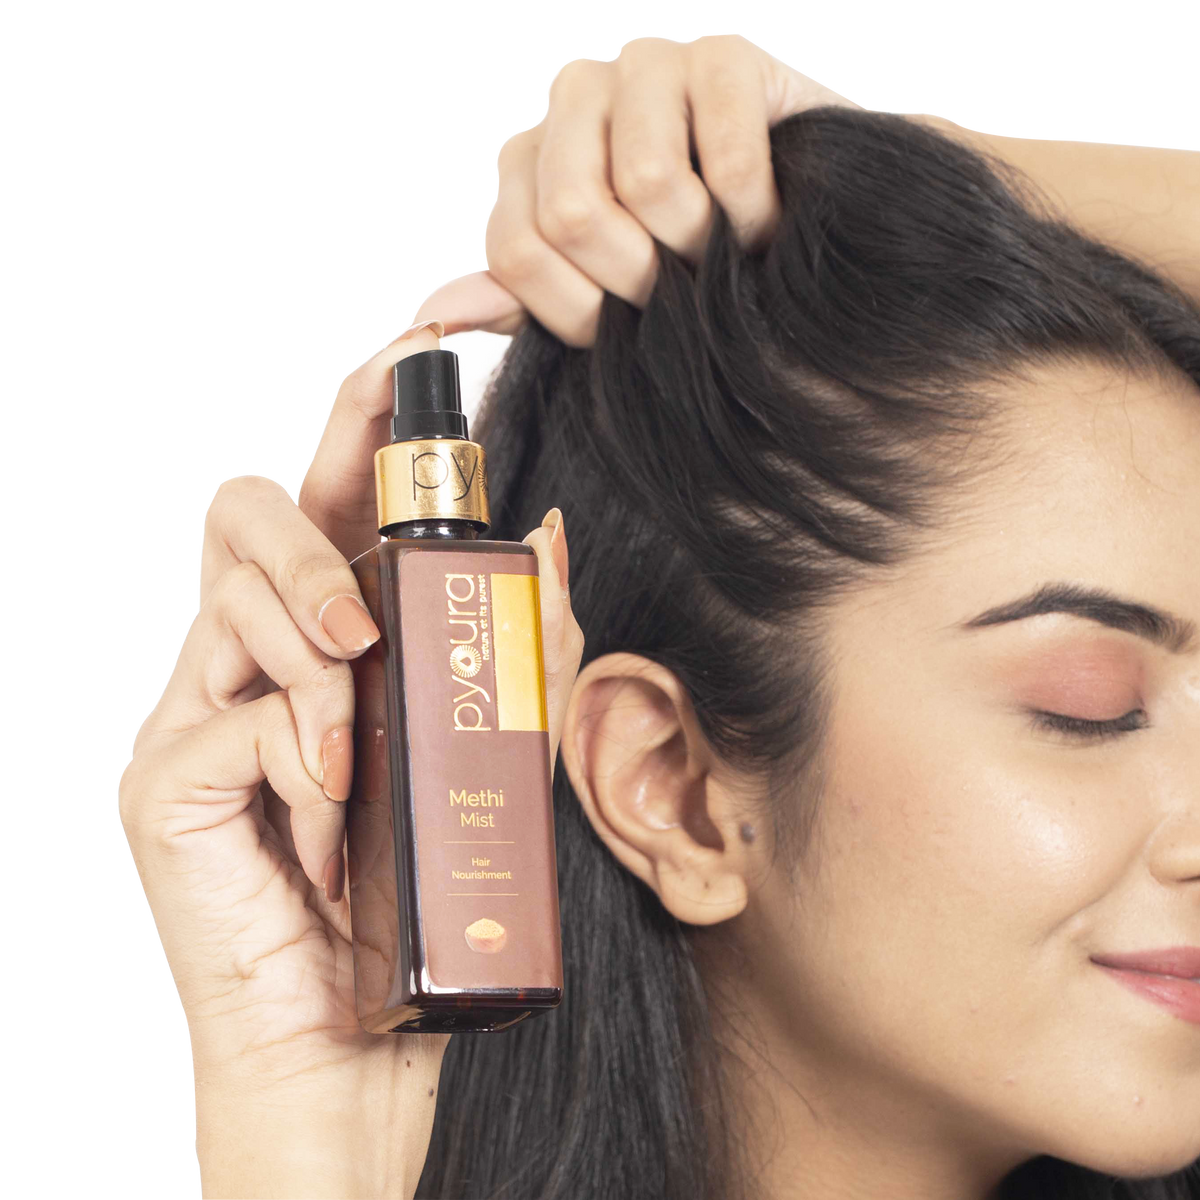 Soft and Silky Hair Care Kit <h4> Pure extracts of natural ingredients <h4> <h6> Pack contains 2 spray mists of 50 ml each and 1 Face Mask<h6>